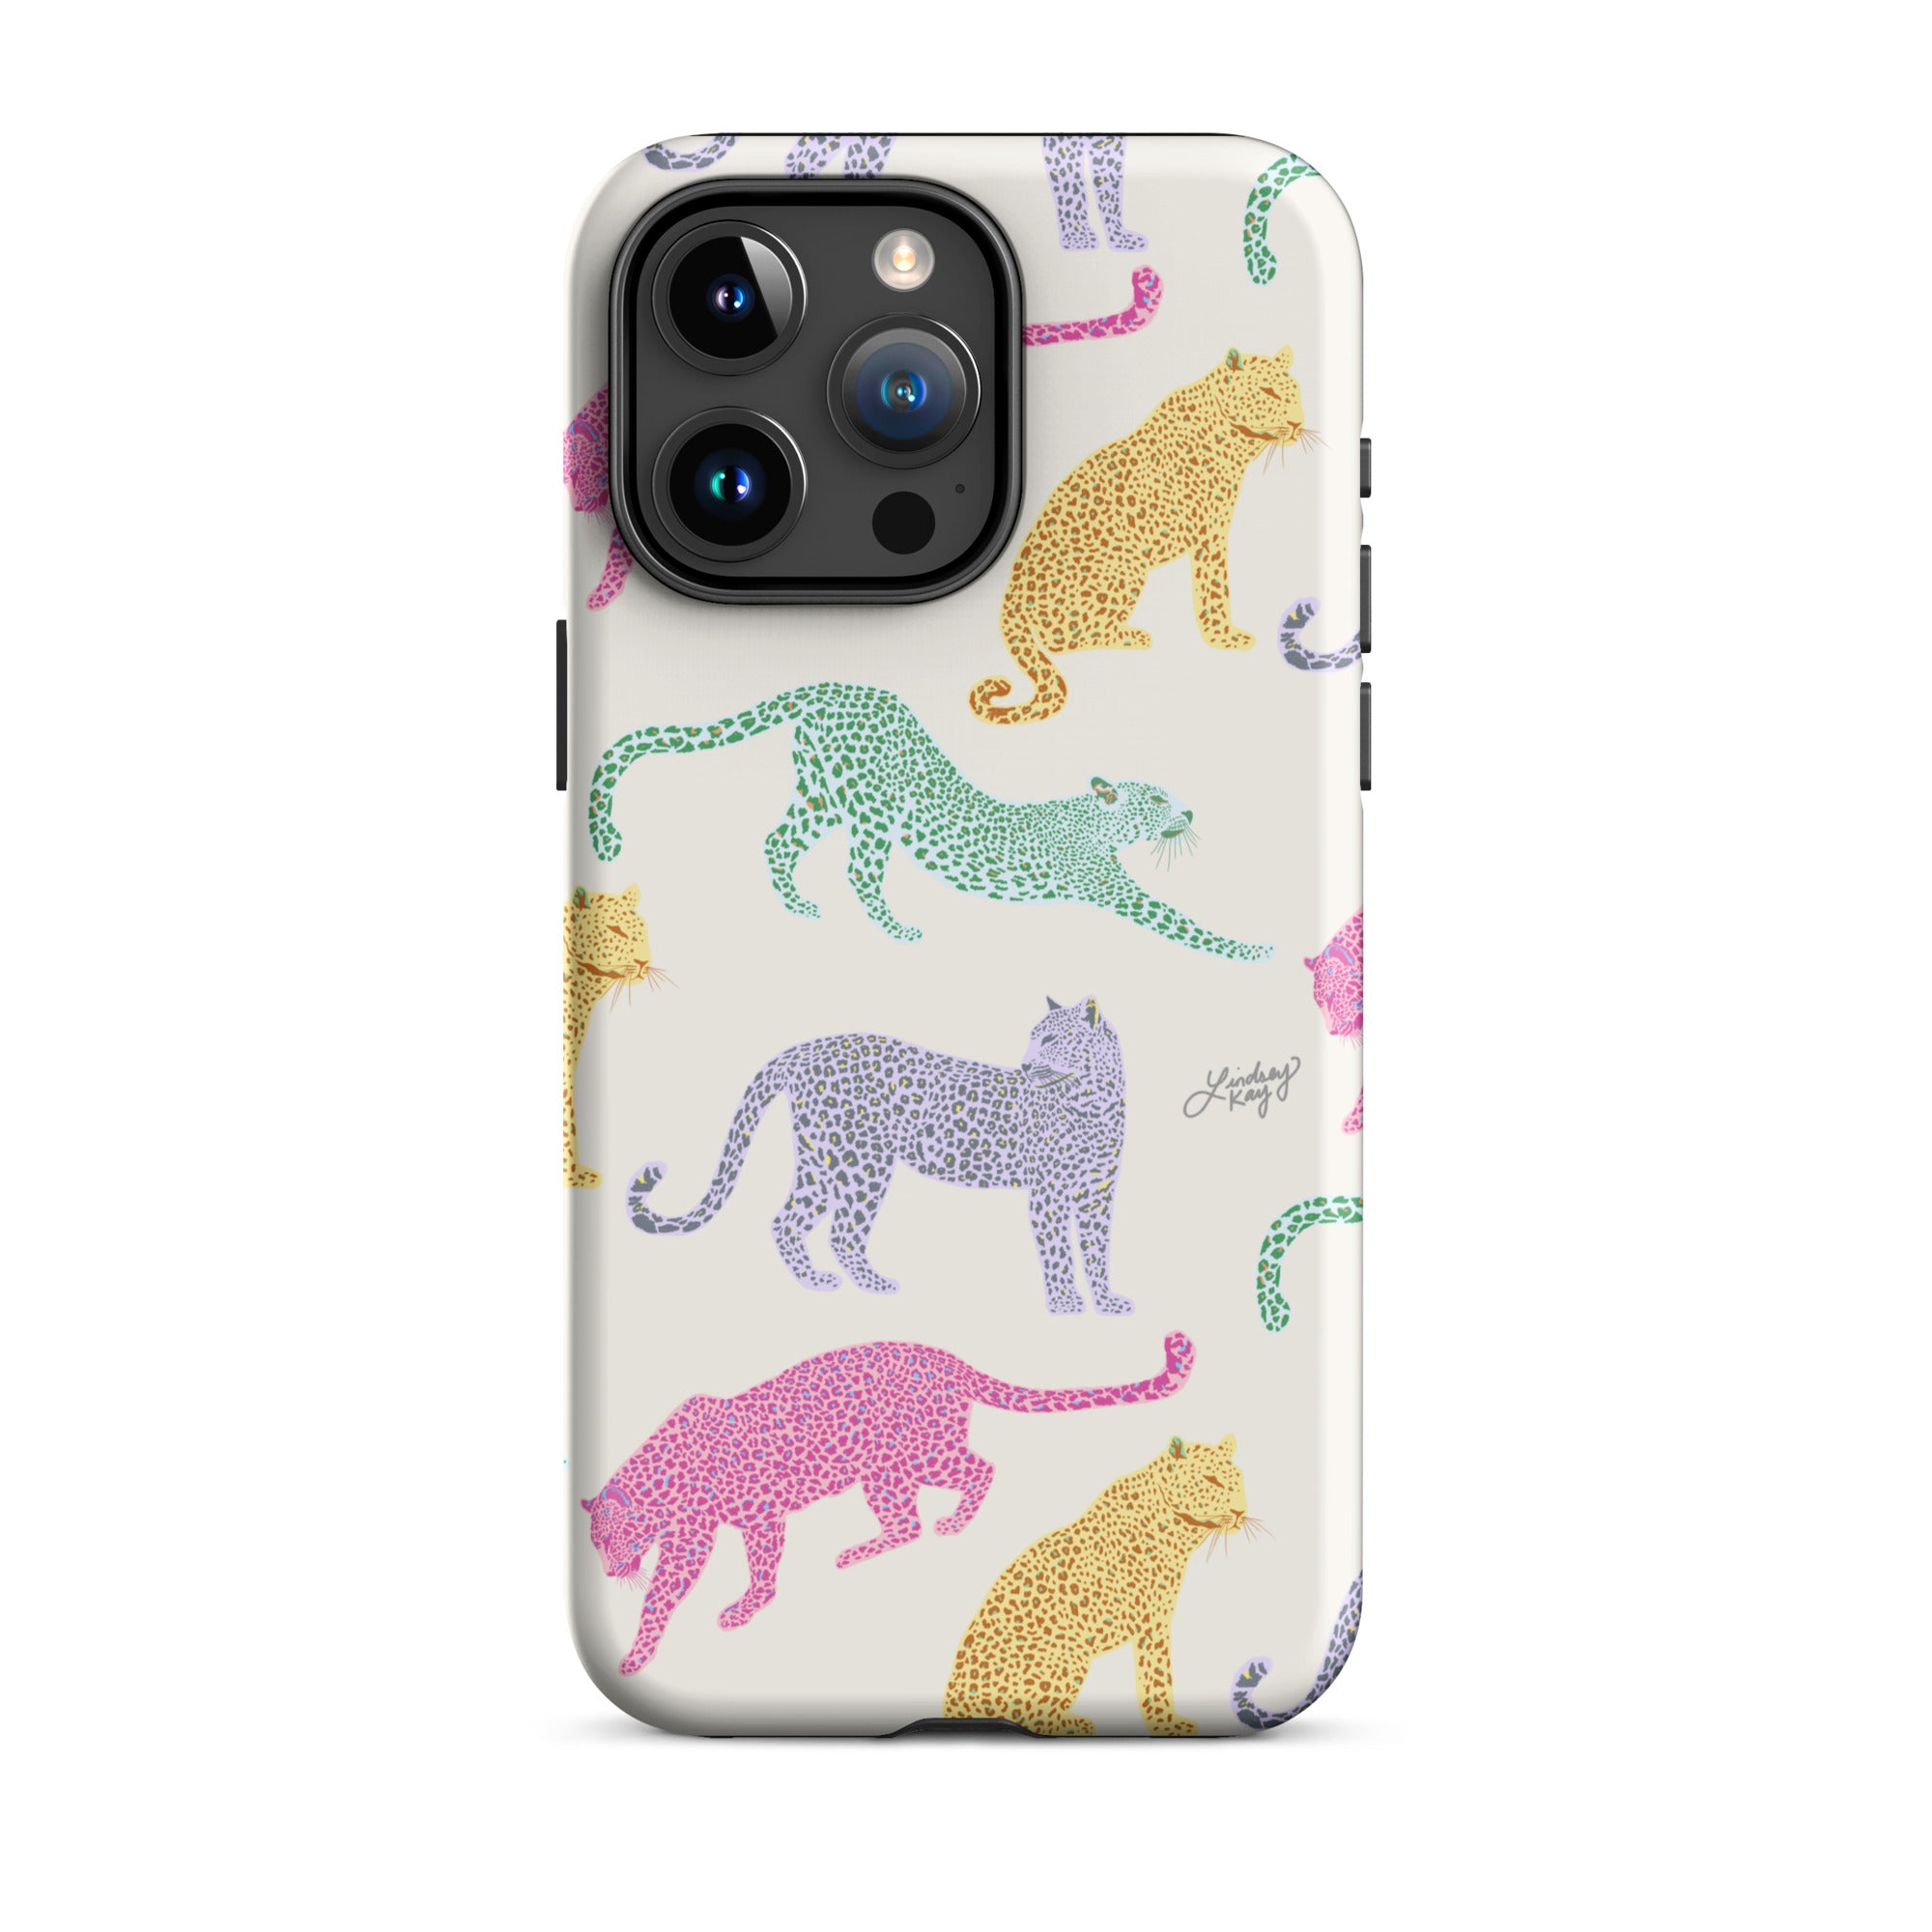 leopard colorful illustration pattern iphone tough case lindsey kay collective iphone15